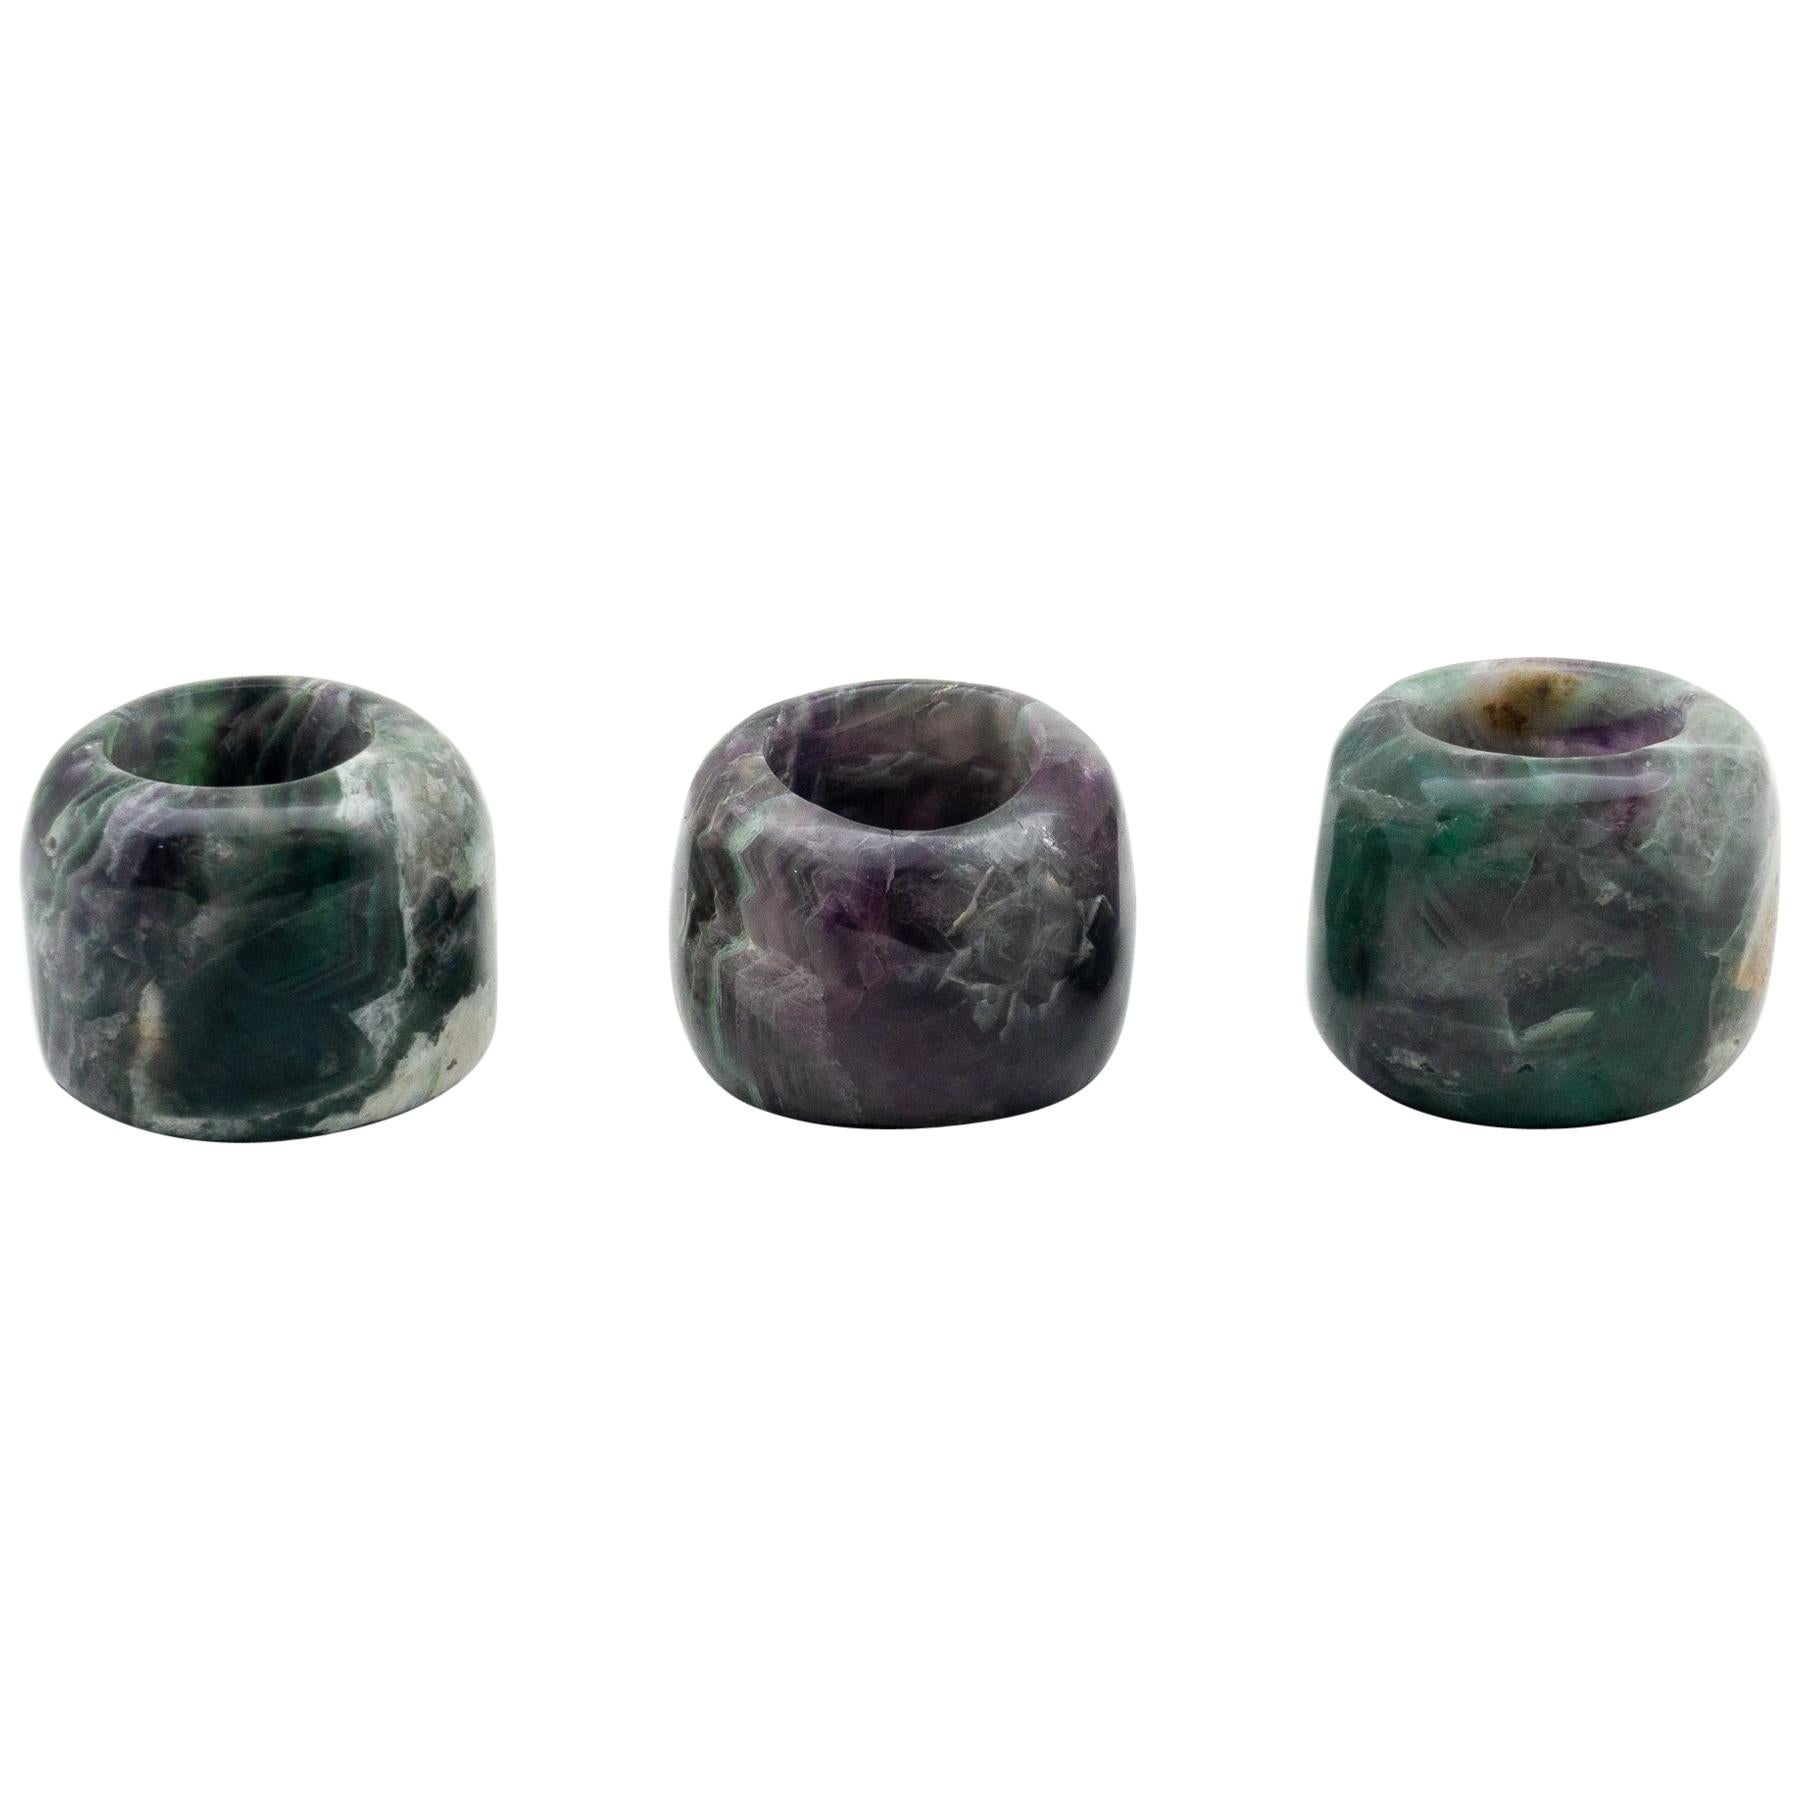 Carved and Polished Natural Fluorite Candleholders, Set of 3